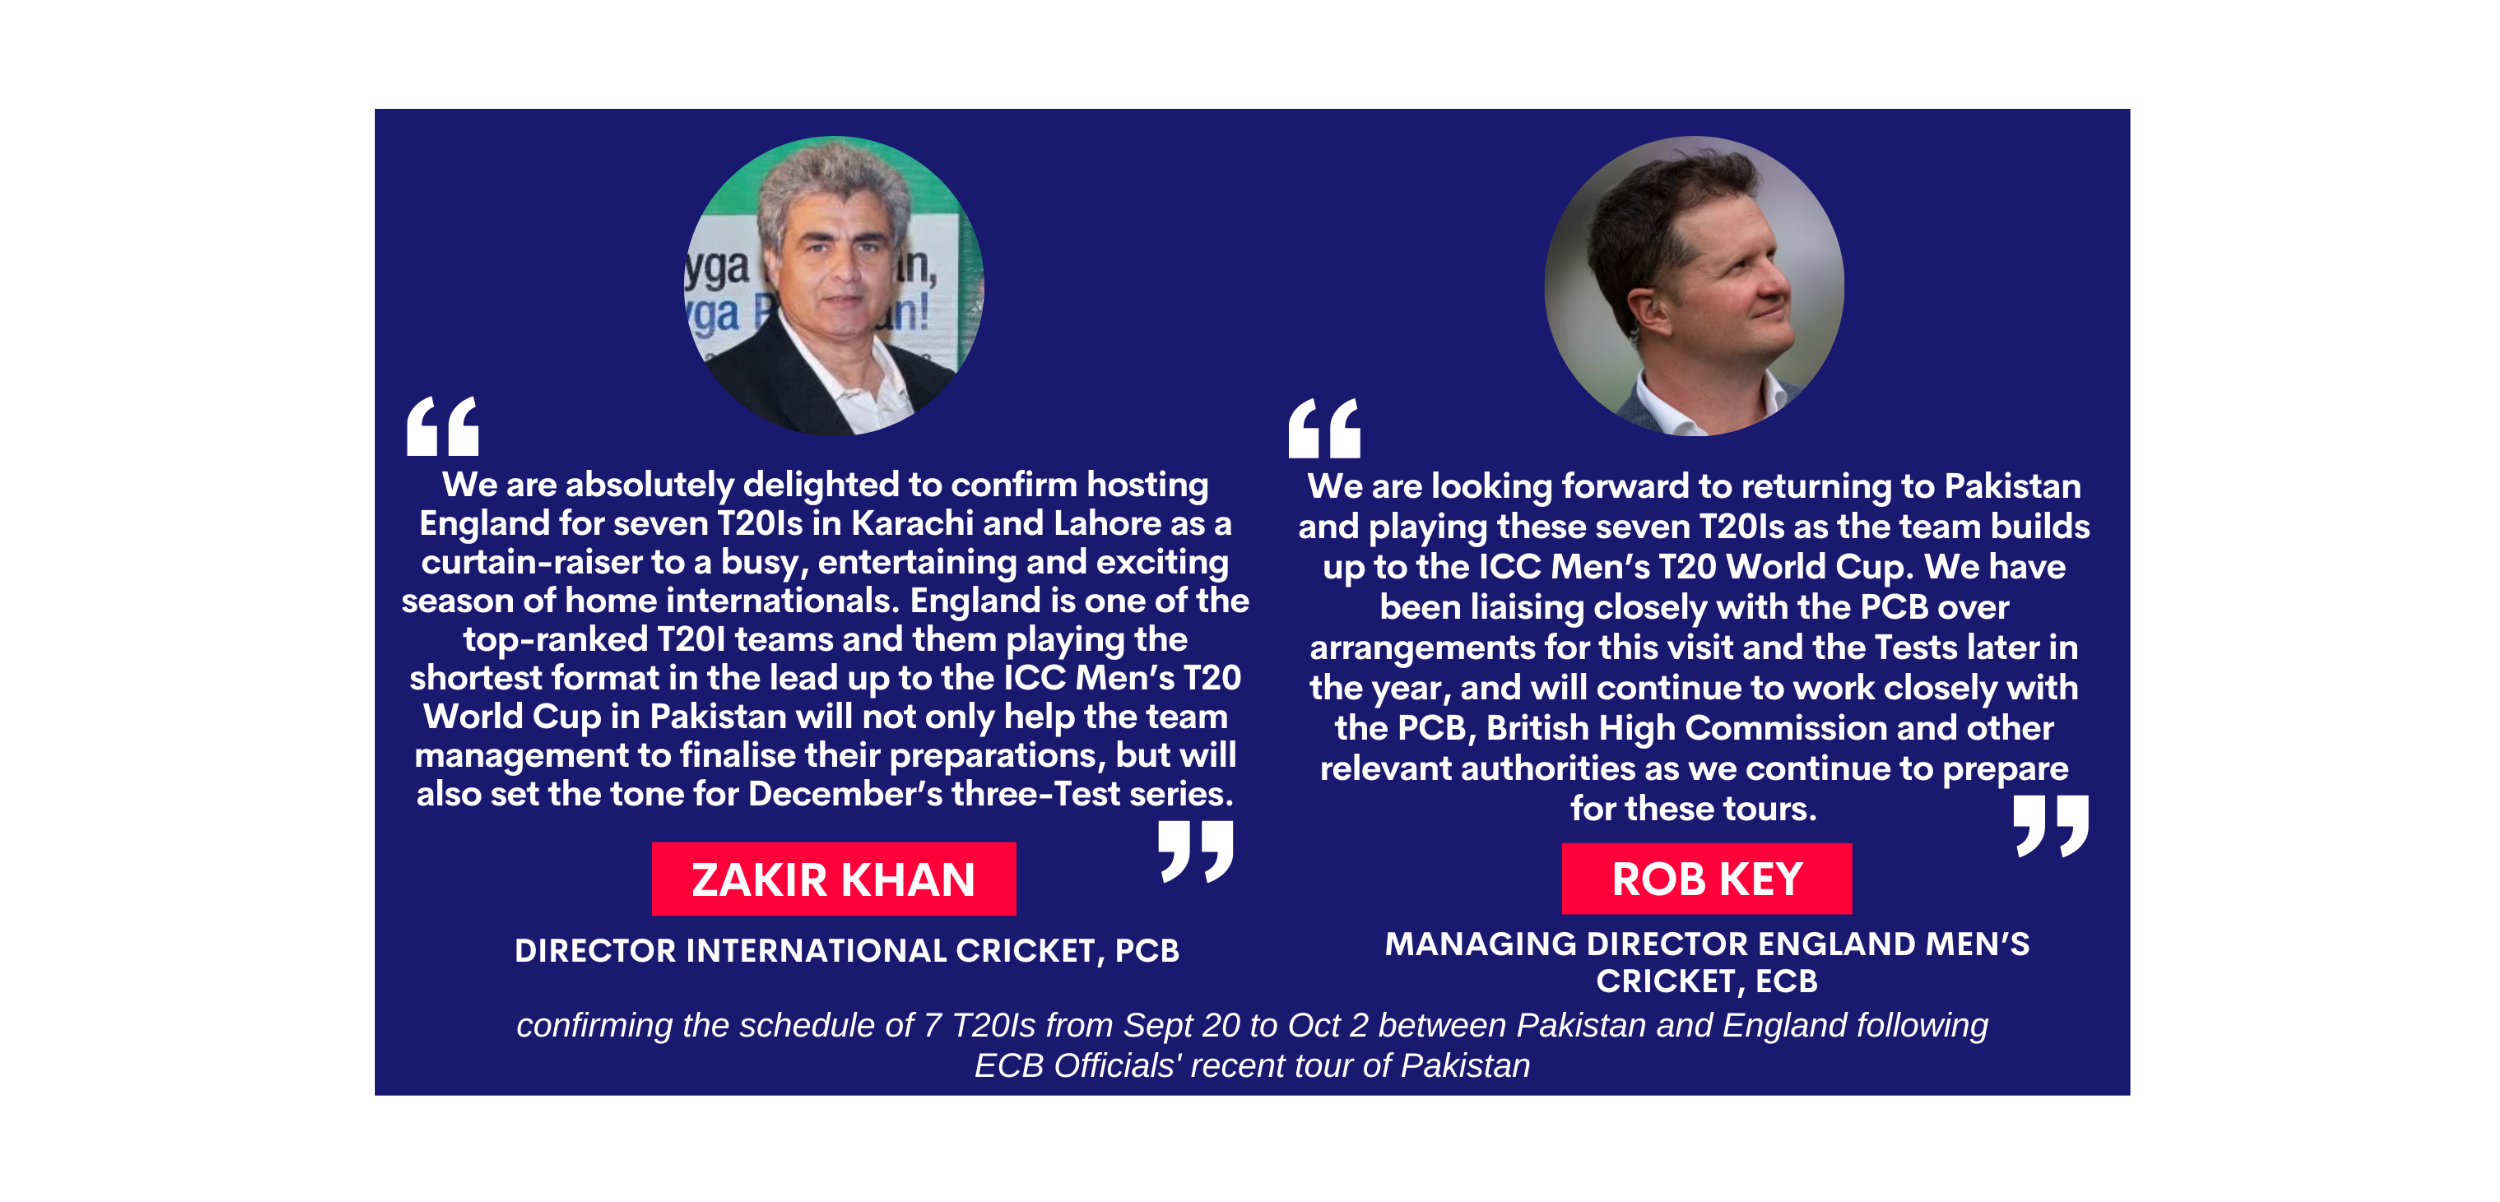 Zakir Khan and Rob Key confirming the schedule of 7 T20Is from Sept 20 to Oct 2 between Pakistan and England following ECB Officials' recent tour of Pakistan